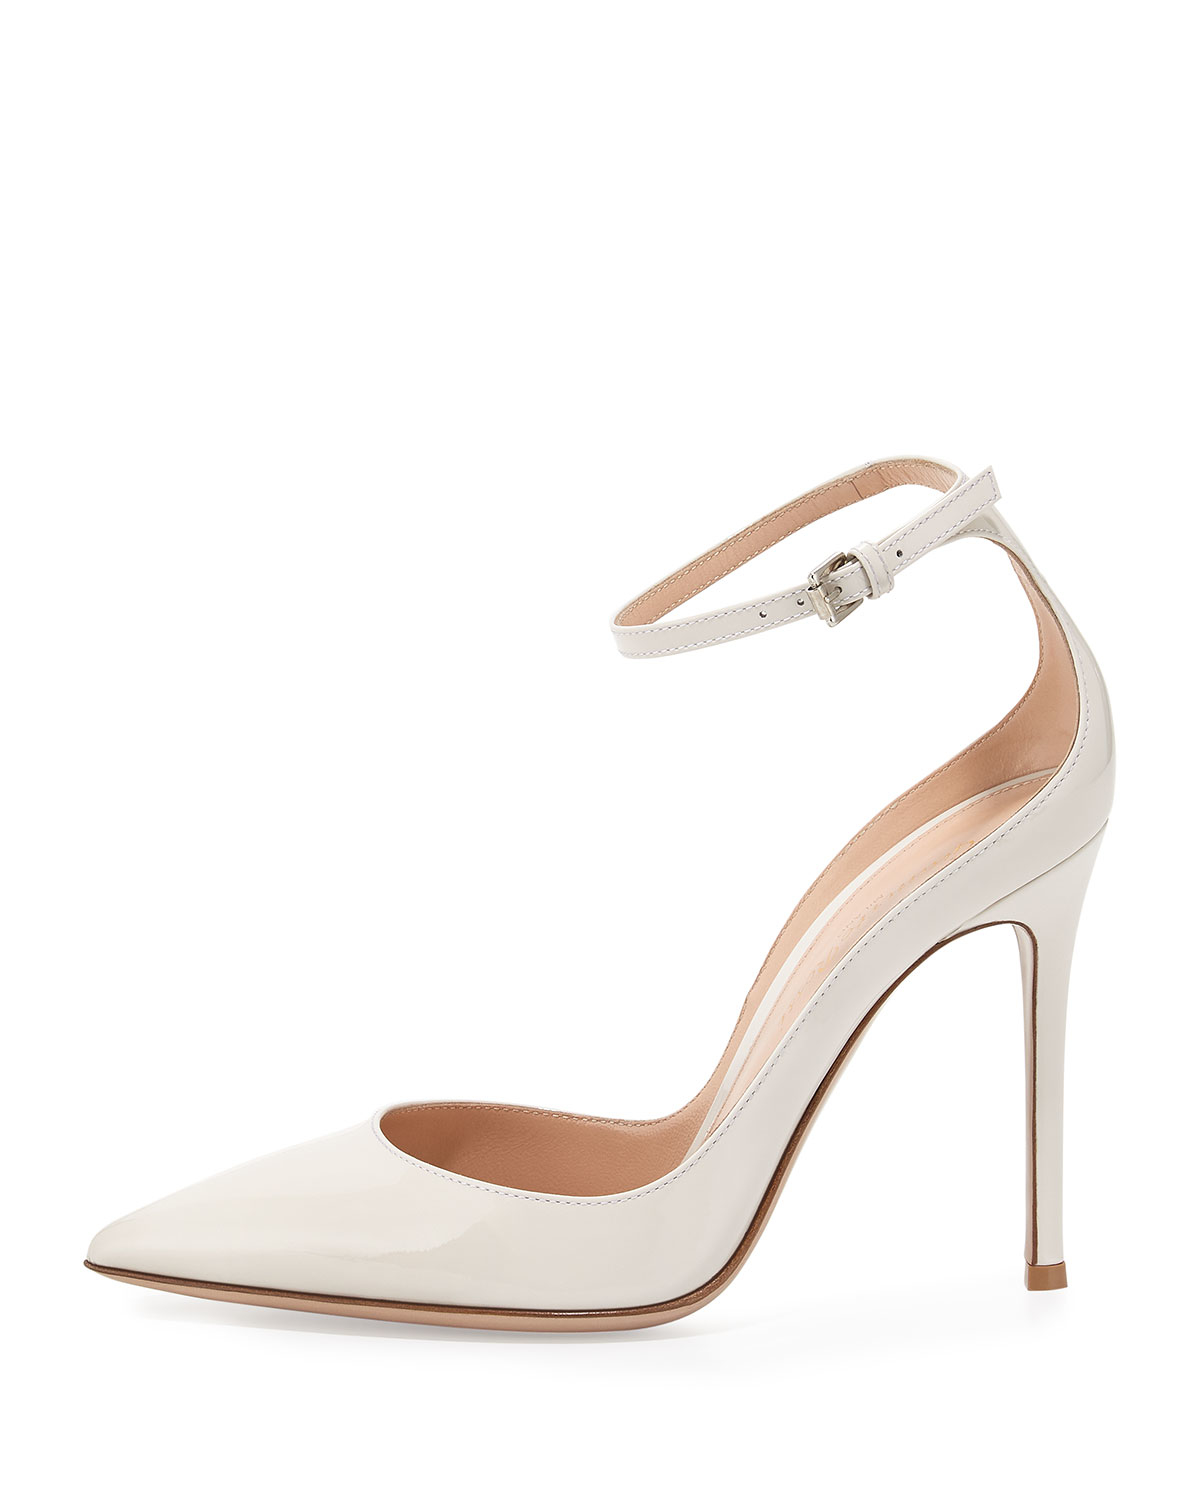 Gianvito Rossi Leather Patent Ankle 